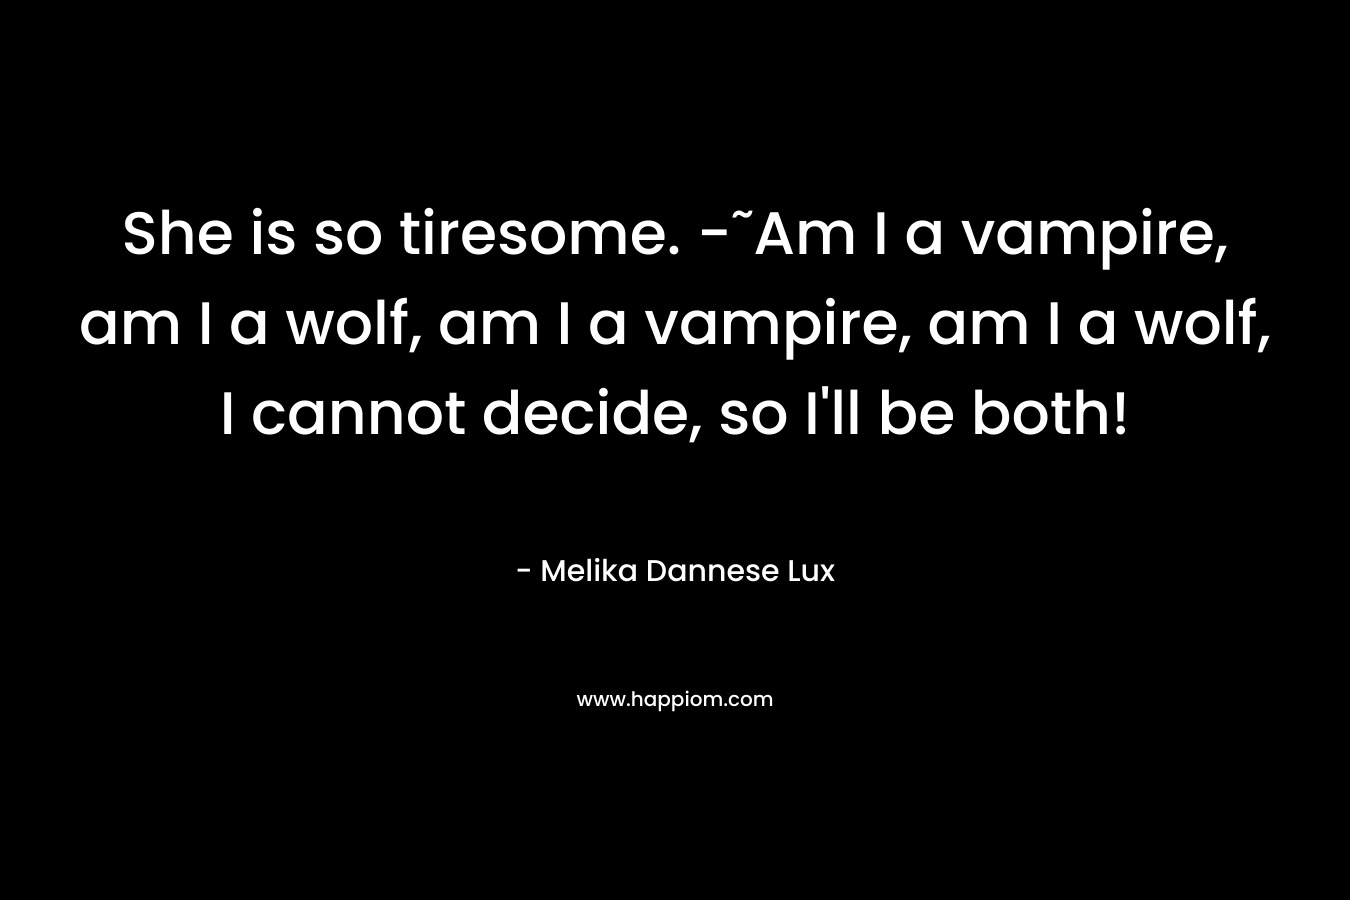 She is so tiresome. -˜Am I a vampire, am I a wolf, am I a vampire, am I a wolf, I cannot decide, so I’ll be both! – Melika Dannese Lux